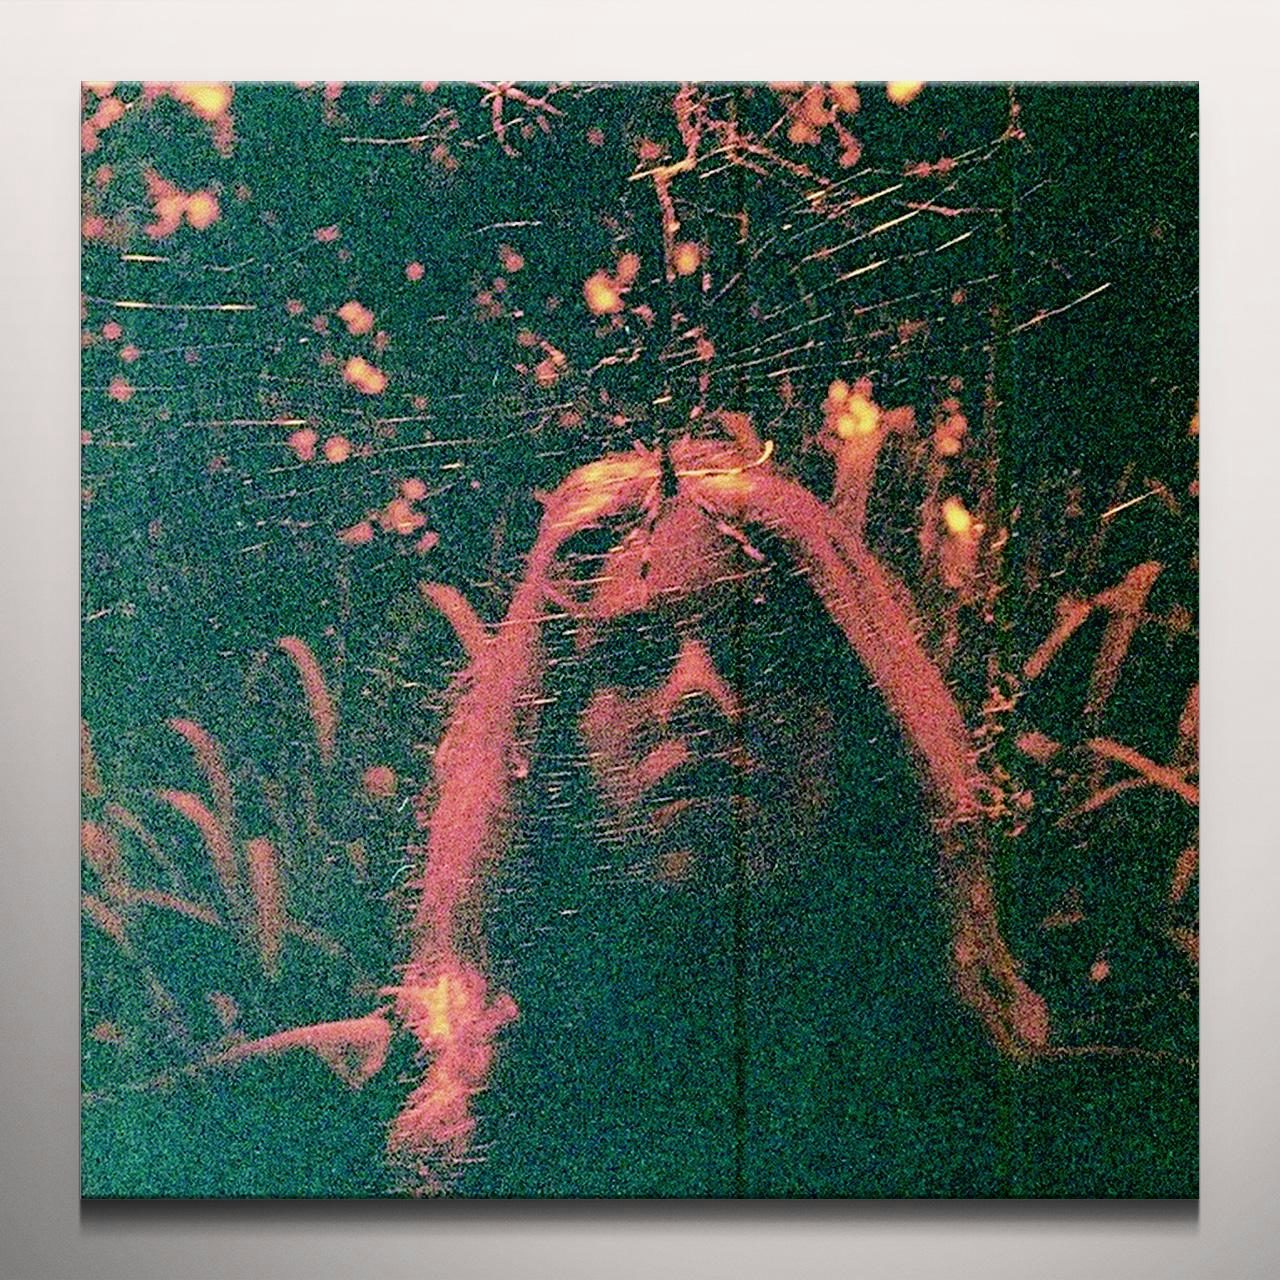 turnover peripheral vision new wave